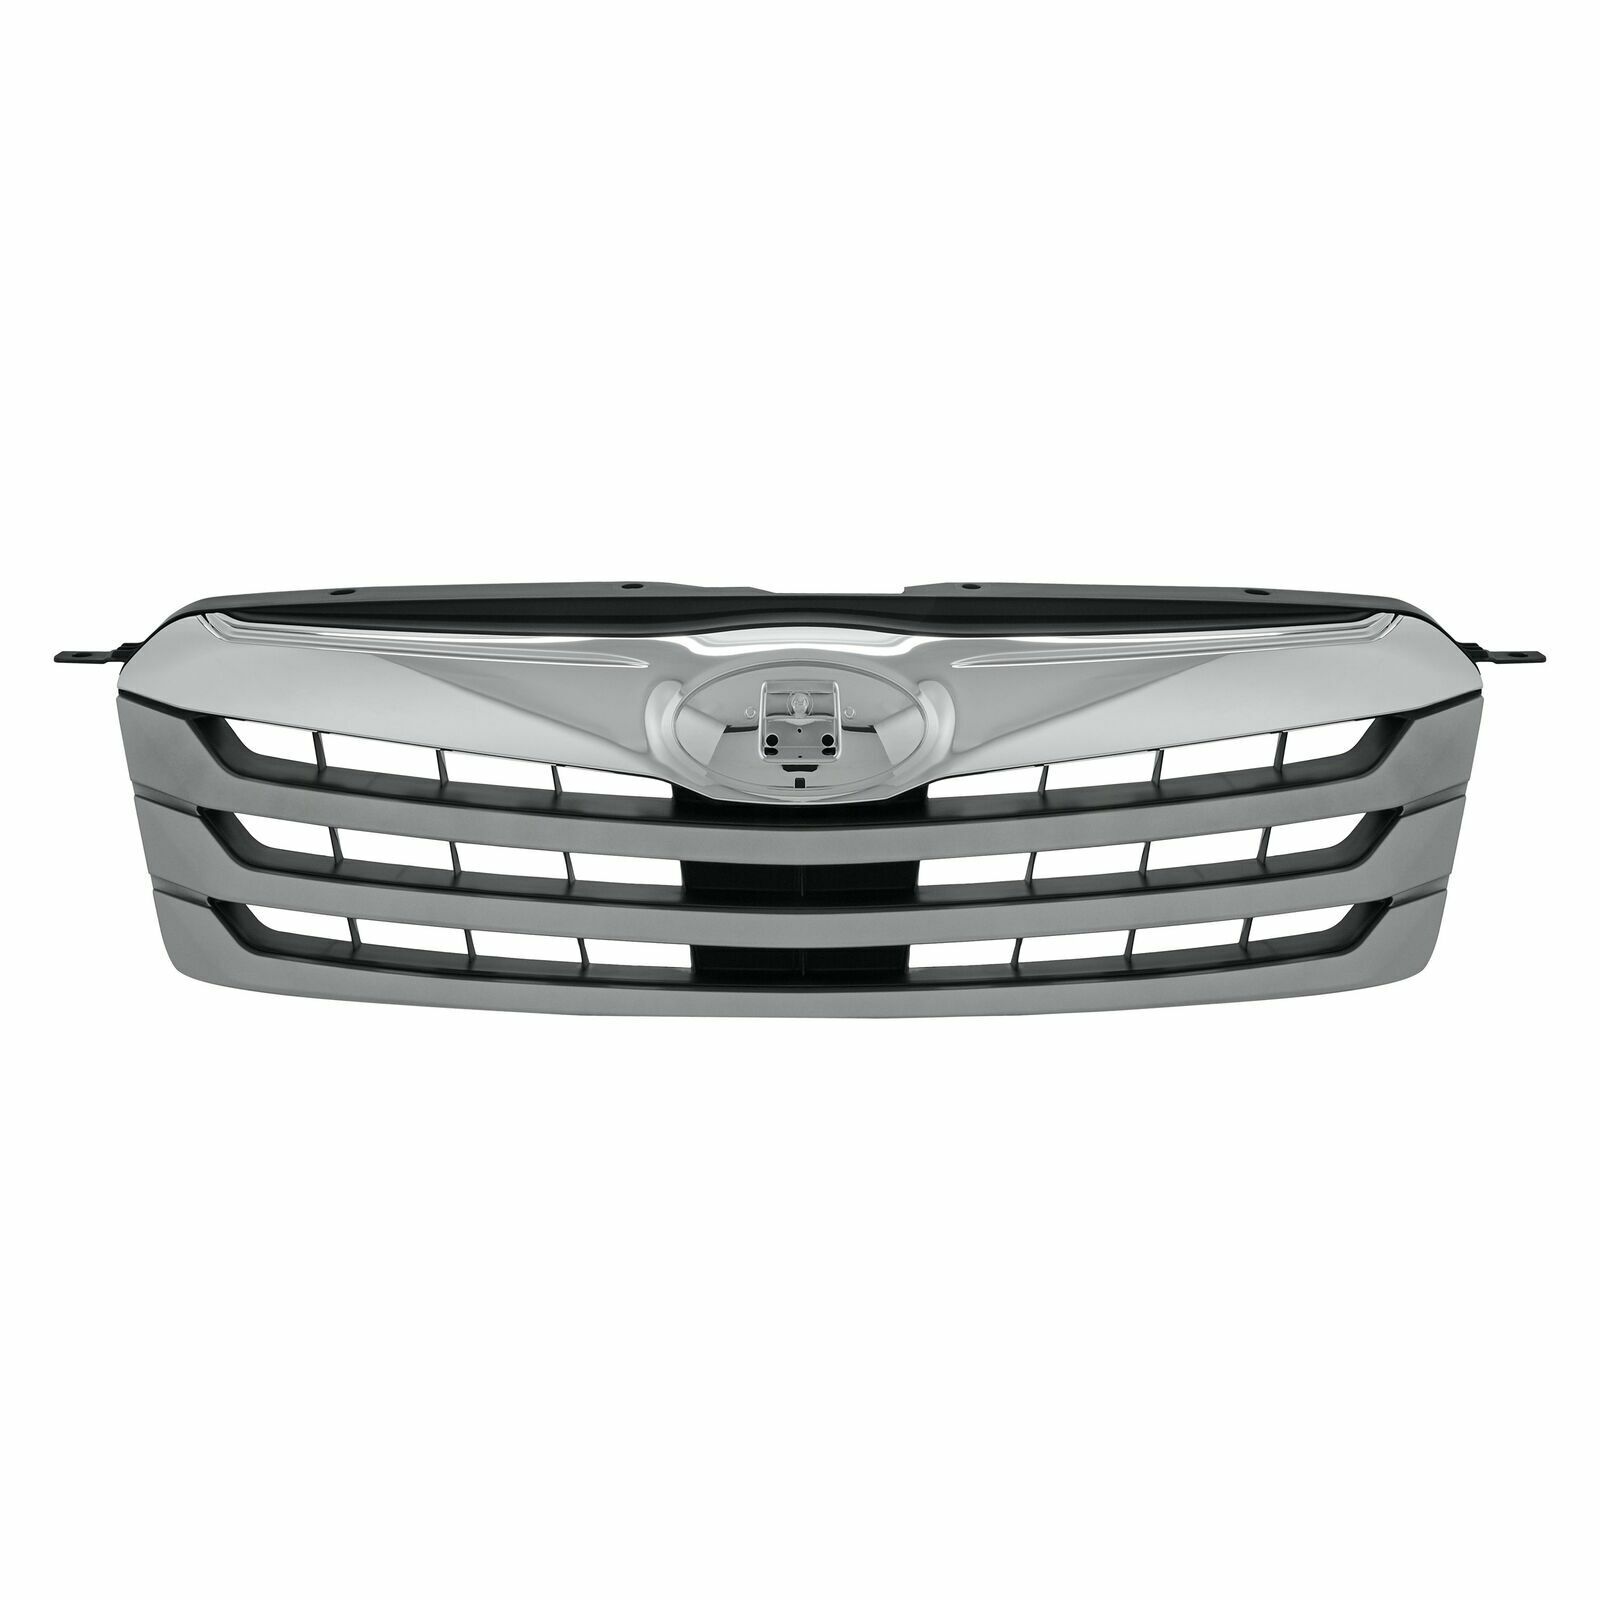 NEW Chrome Grille Assembly For 2010-2012 Subaru Outback SU1200143 SHIPS TODAY